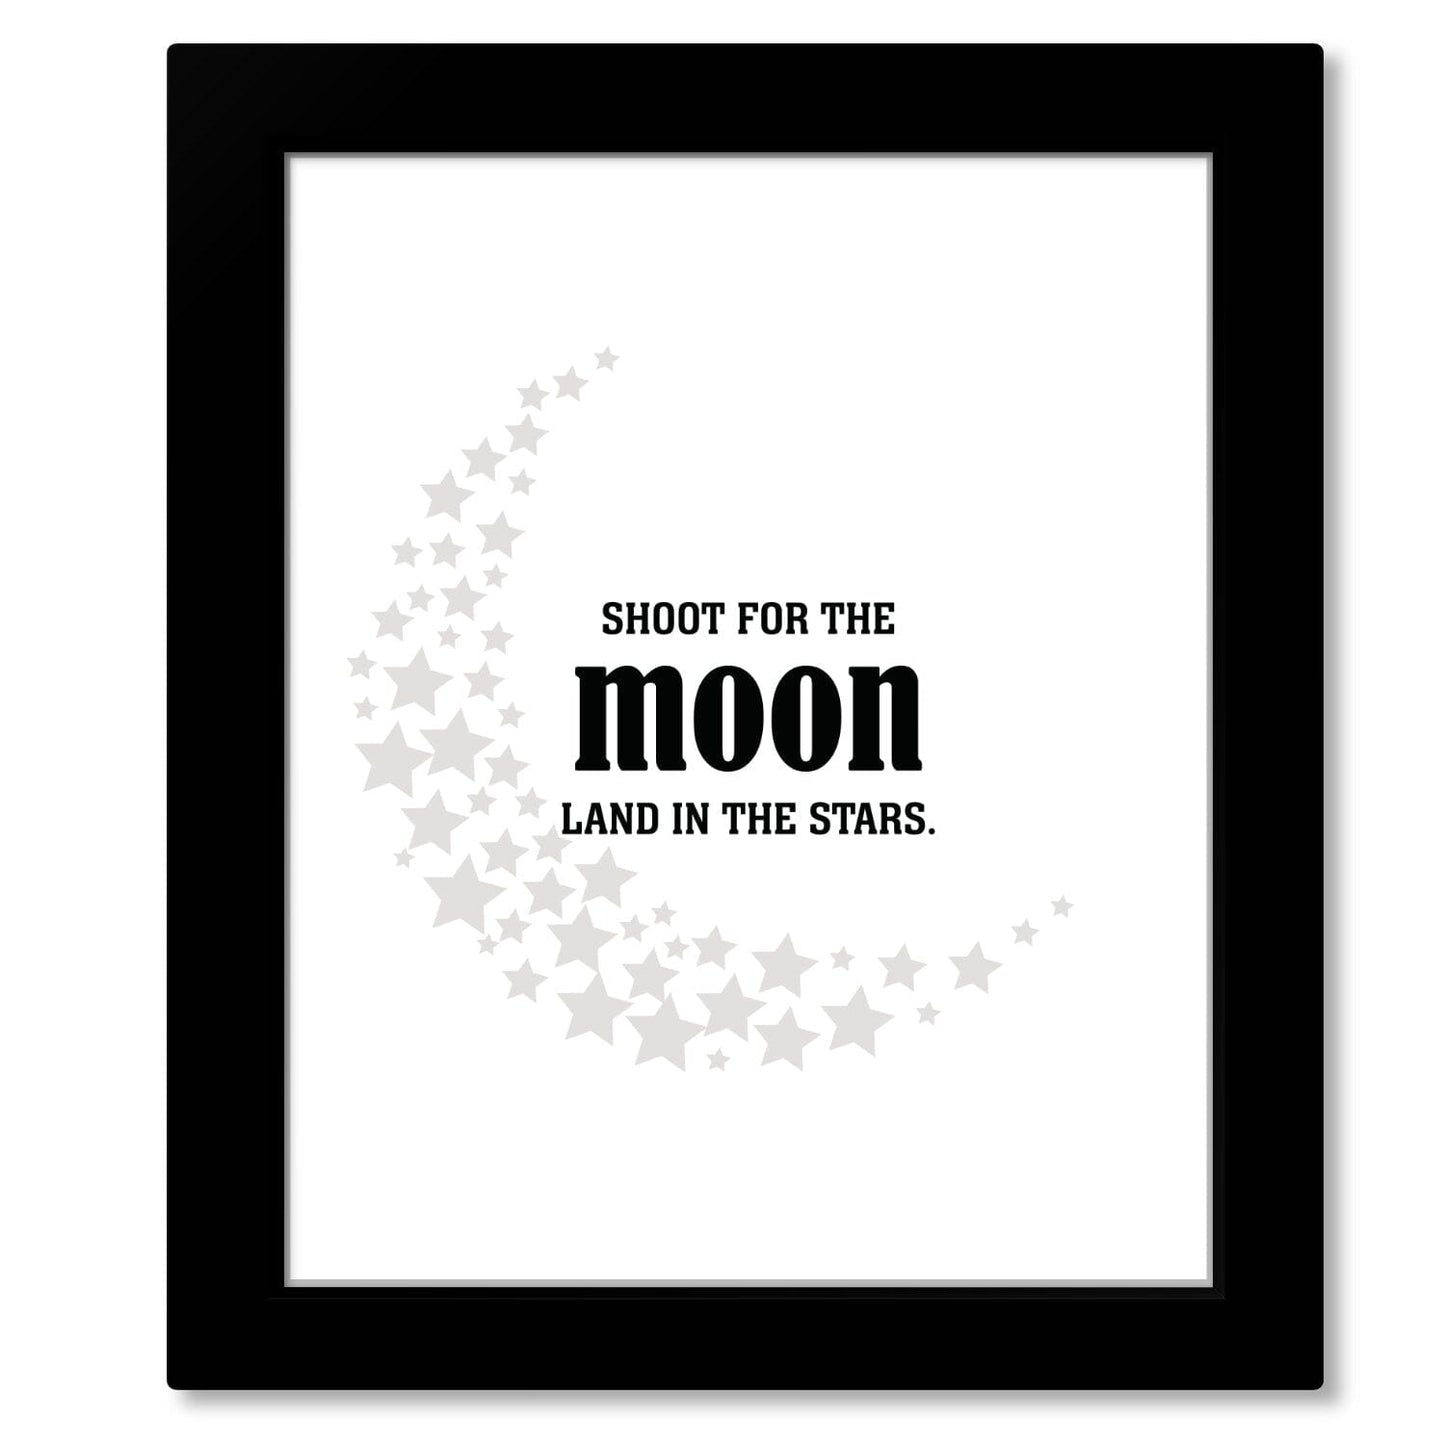 Shoot for the Moon, Land in the Stars - Wise and Witty Print Wise and Wiseass Quotes Song Lyrics Art 8x10 Framed Print 